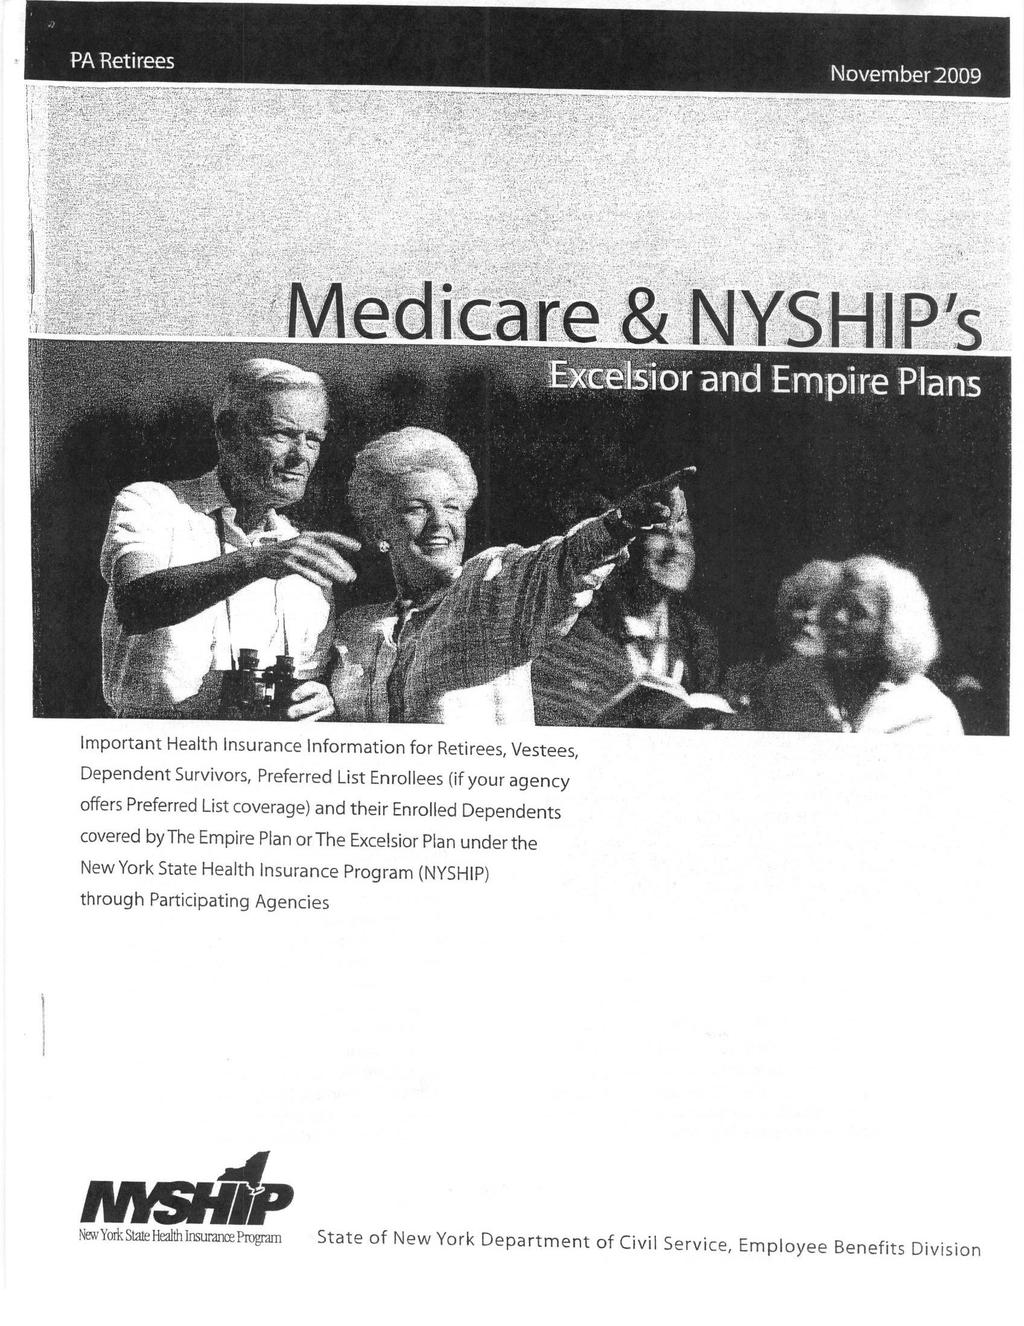 PA Retirees November2009 Medinire & NYSHIP s Important Health Insurance Information for Retirees, Vestees, Dependent Survivors, Preferred List Enrollees if your agency offers Preferred List coverage